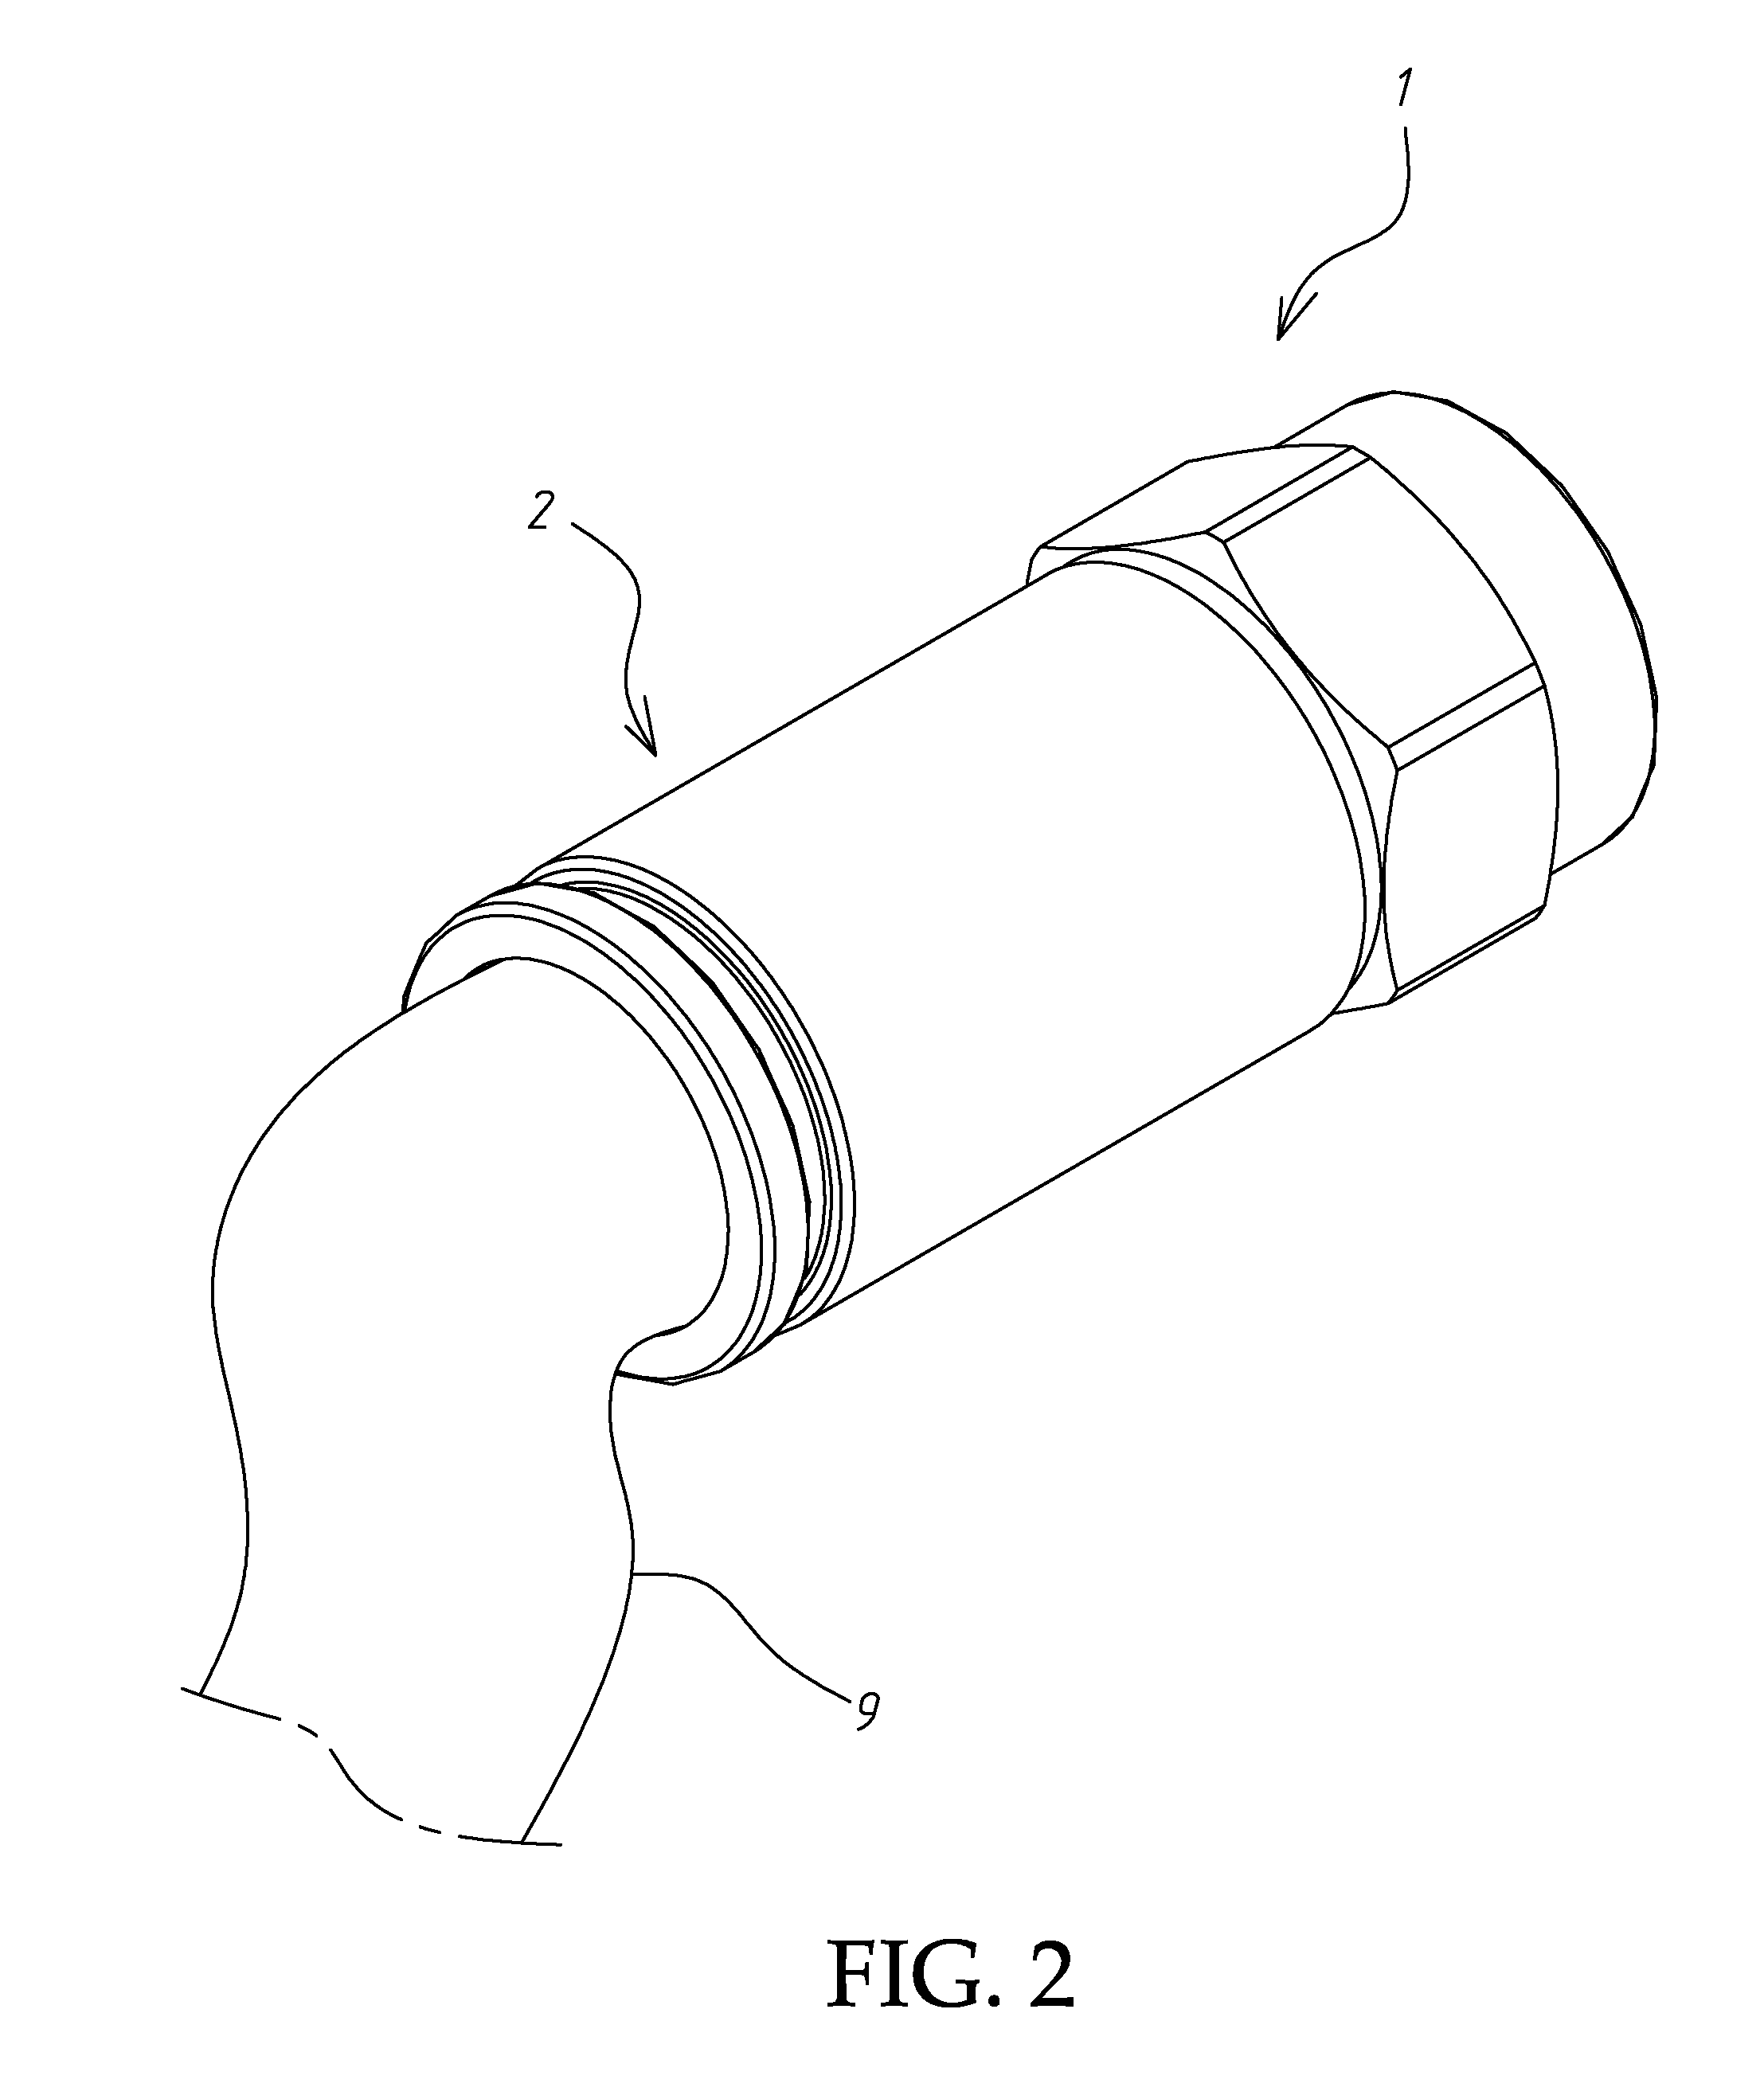 Coaxial cable connector using a multi-contact spring washer